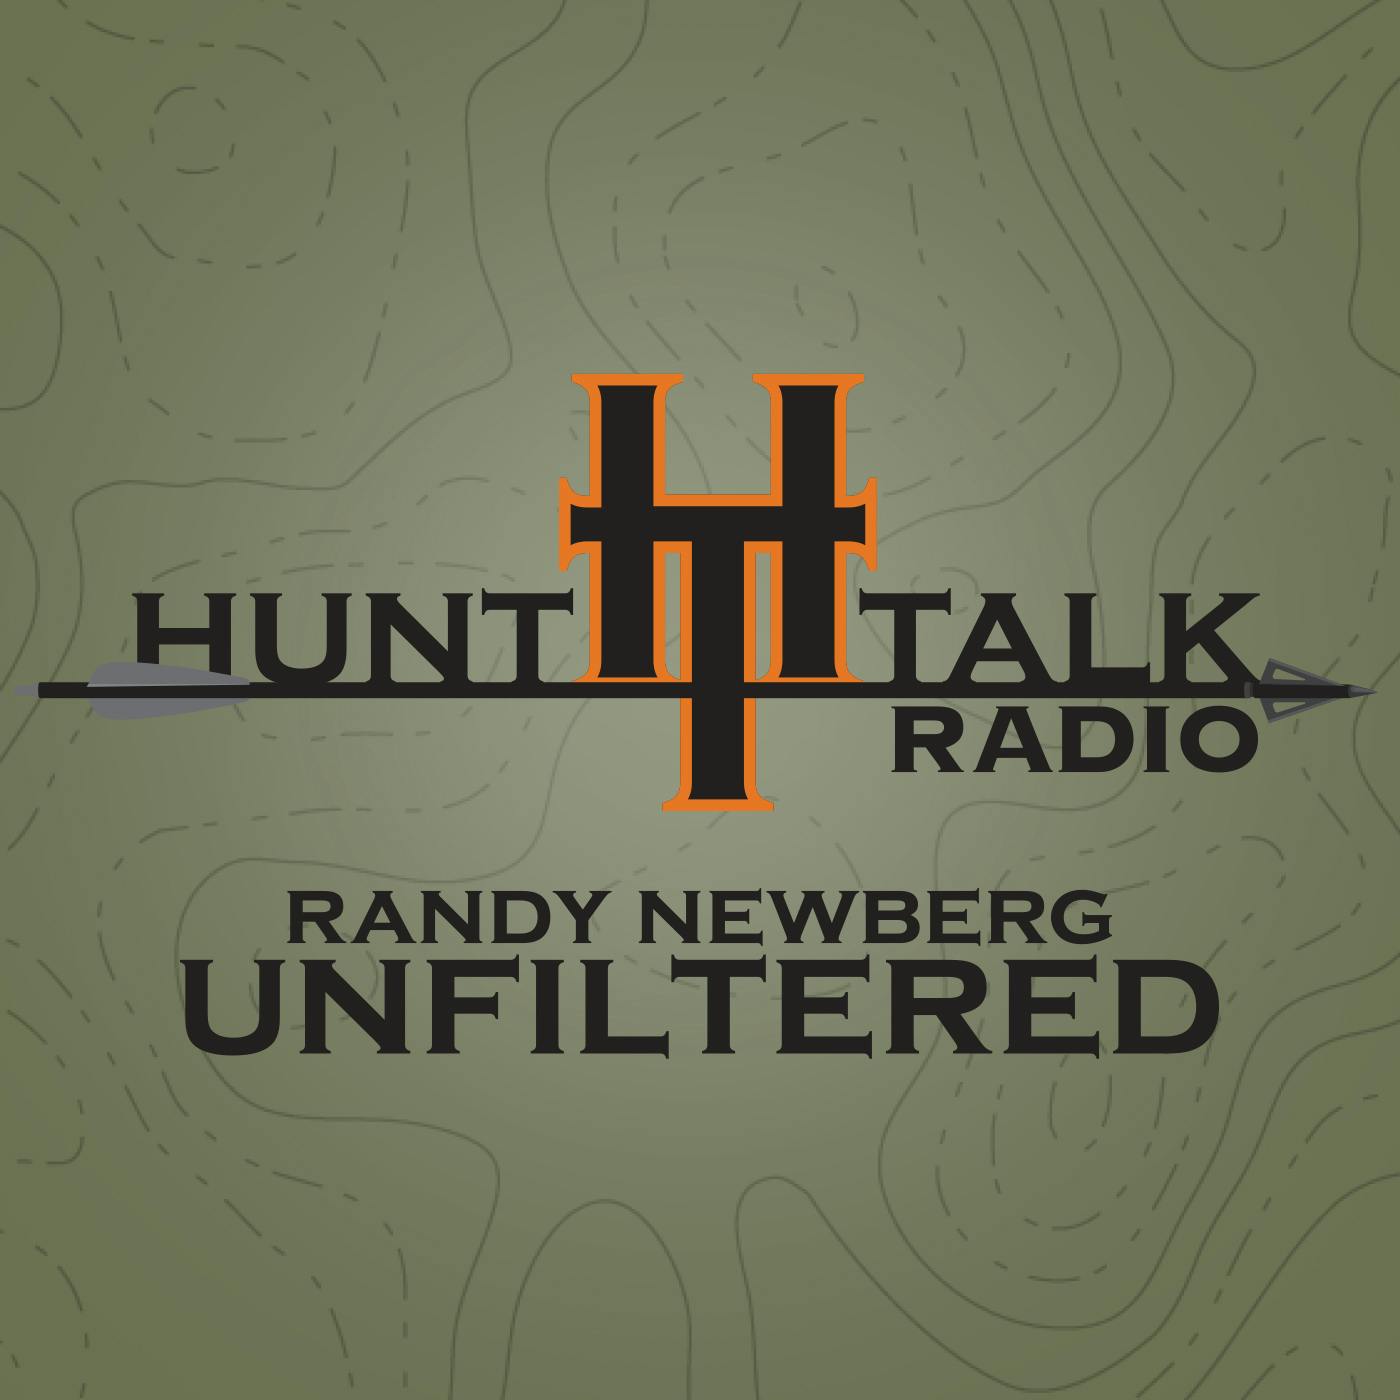 EP 008: Randy Newberg talks with Charlie Decker & Bob Munson, the founders of the Rocky Mountain Elk Foundation.